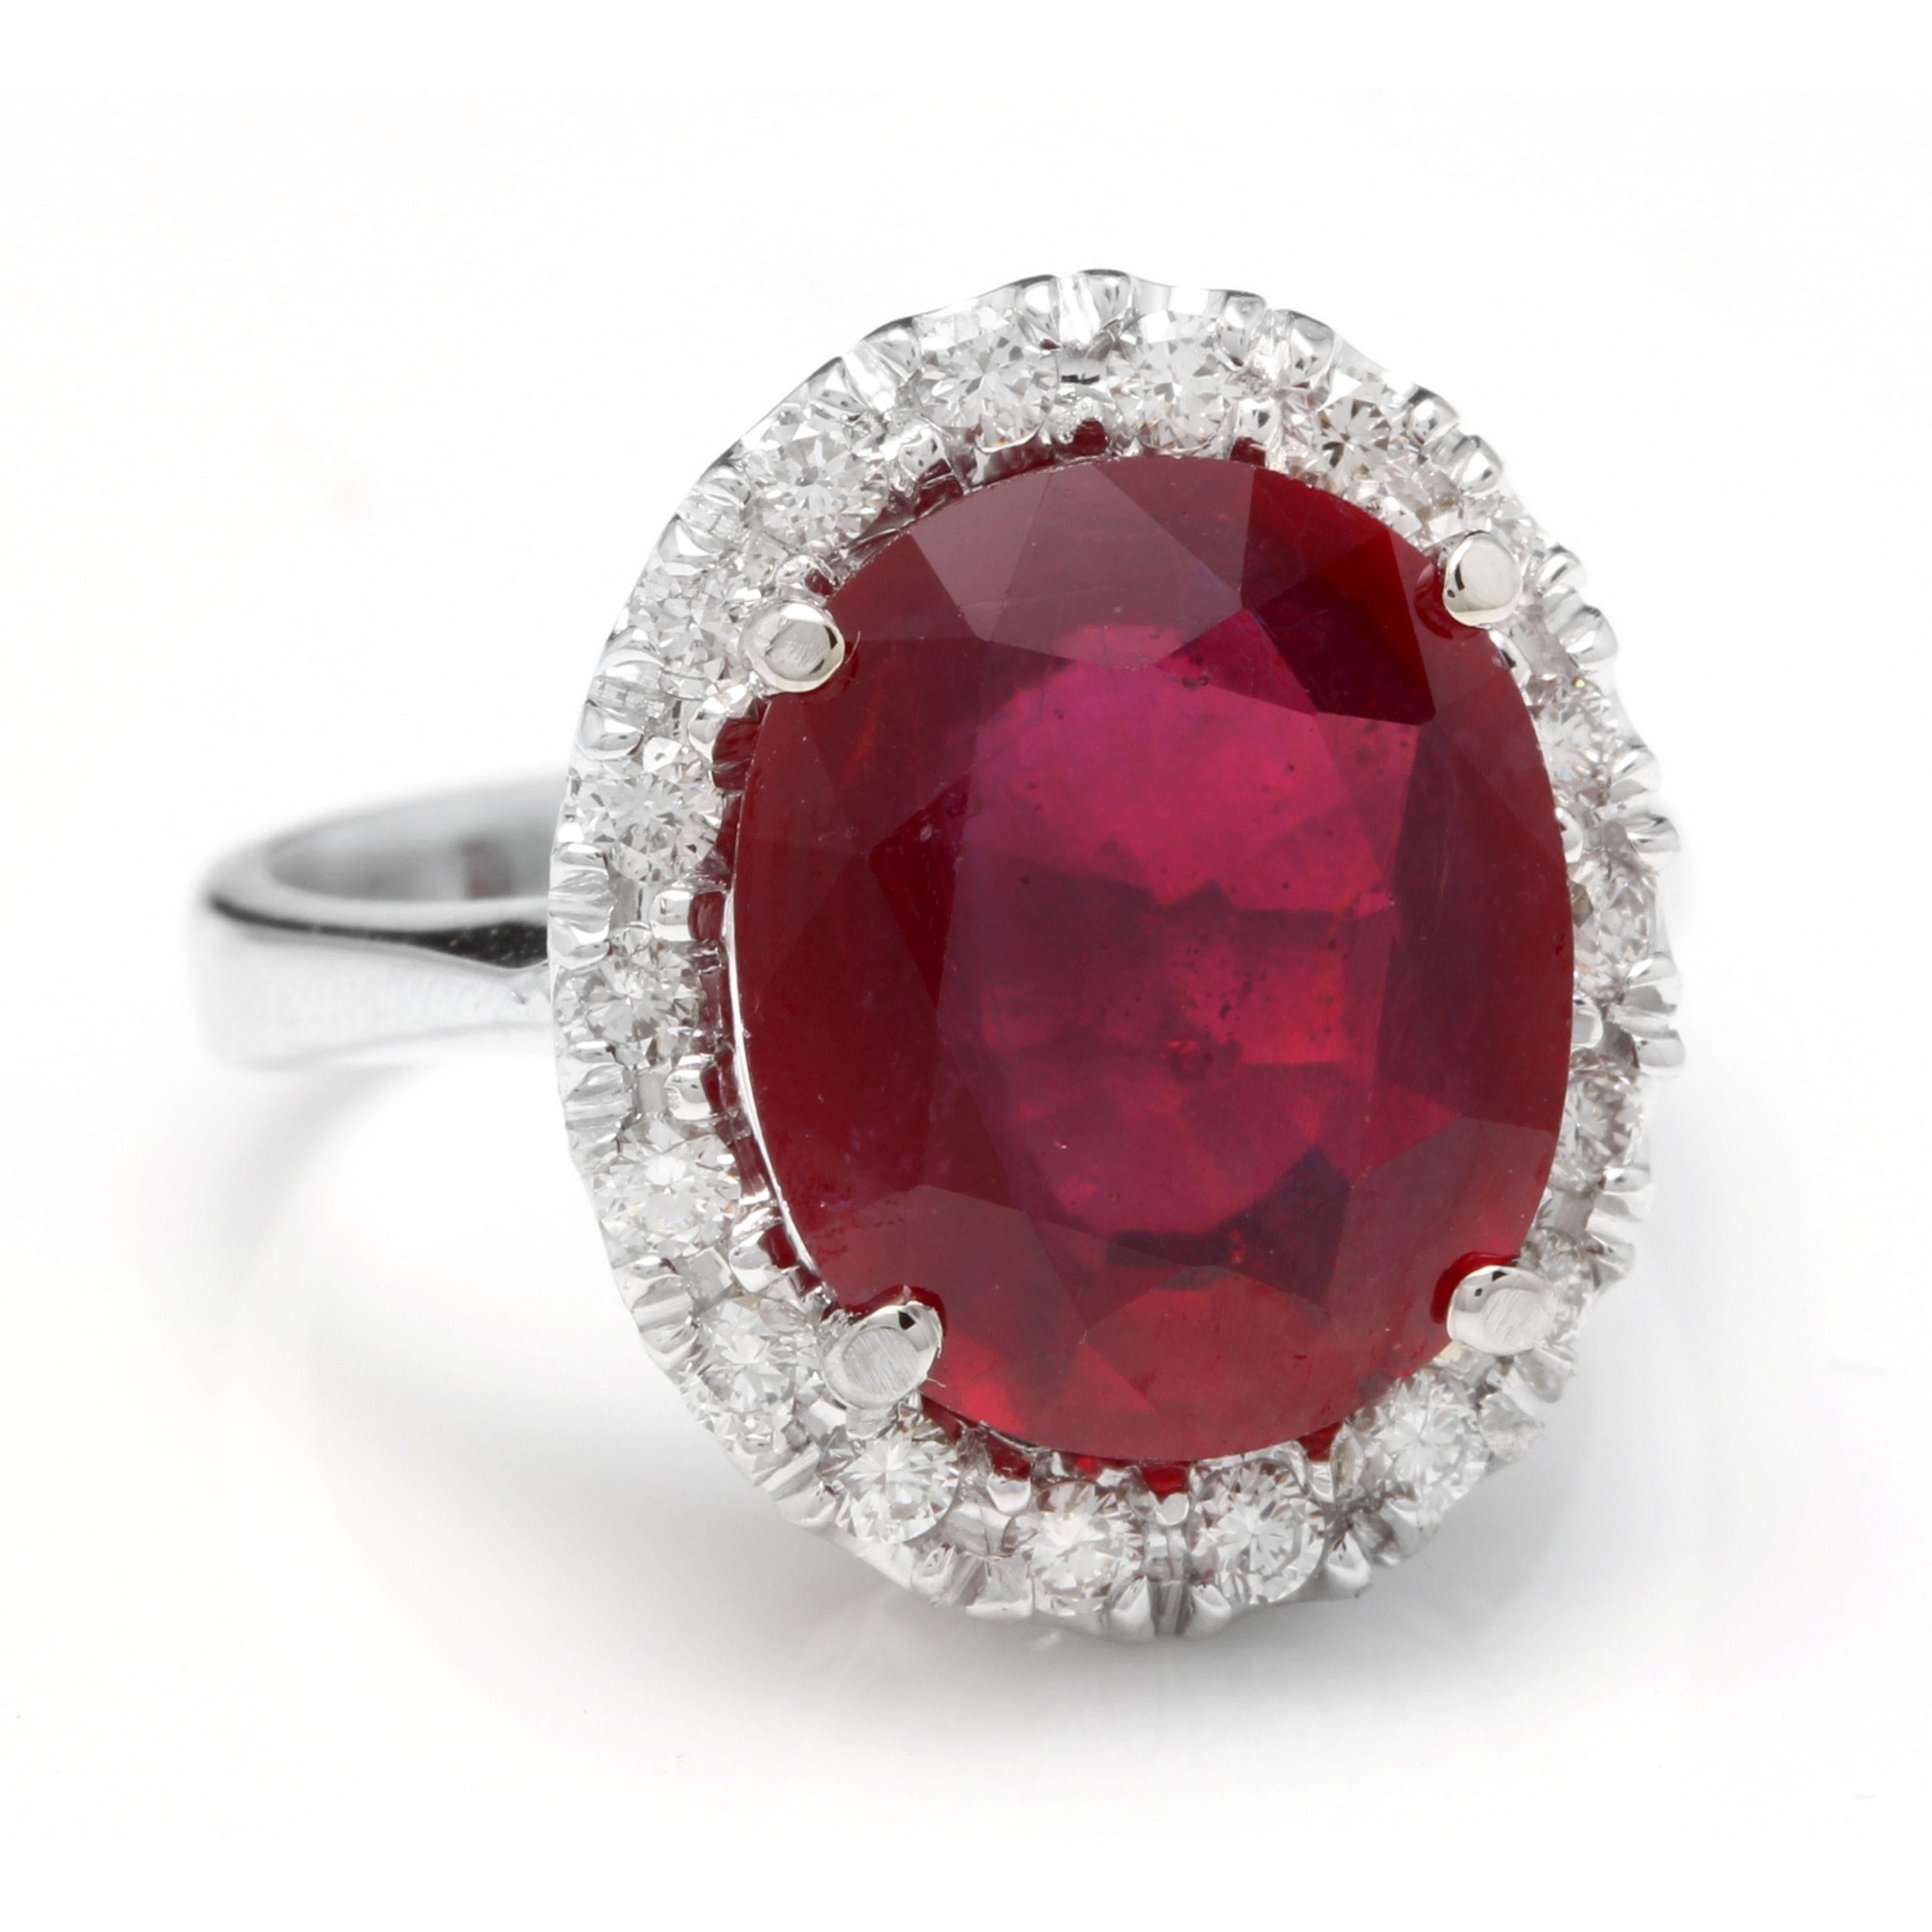 8.80 Carats Impressive Natural Red Ruby and Diamond 14K White Gold Ring

Total Red Ruby Weight is: Apprx. 8.00 Carats (Lead Glass Filled)

Ruby Measures: Approx. 12.00 x 10.00mm

Natural Round Diamonds Weight: Approx. 0.80 Carats (color G-H /